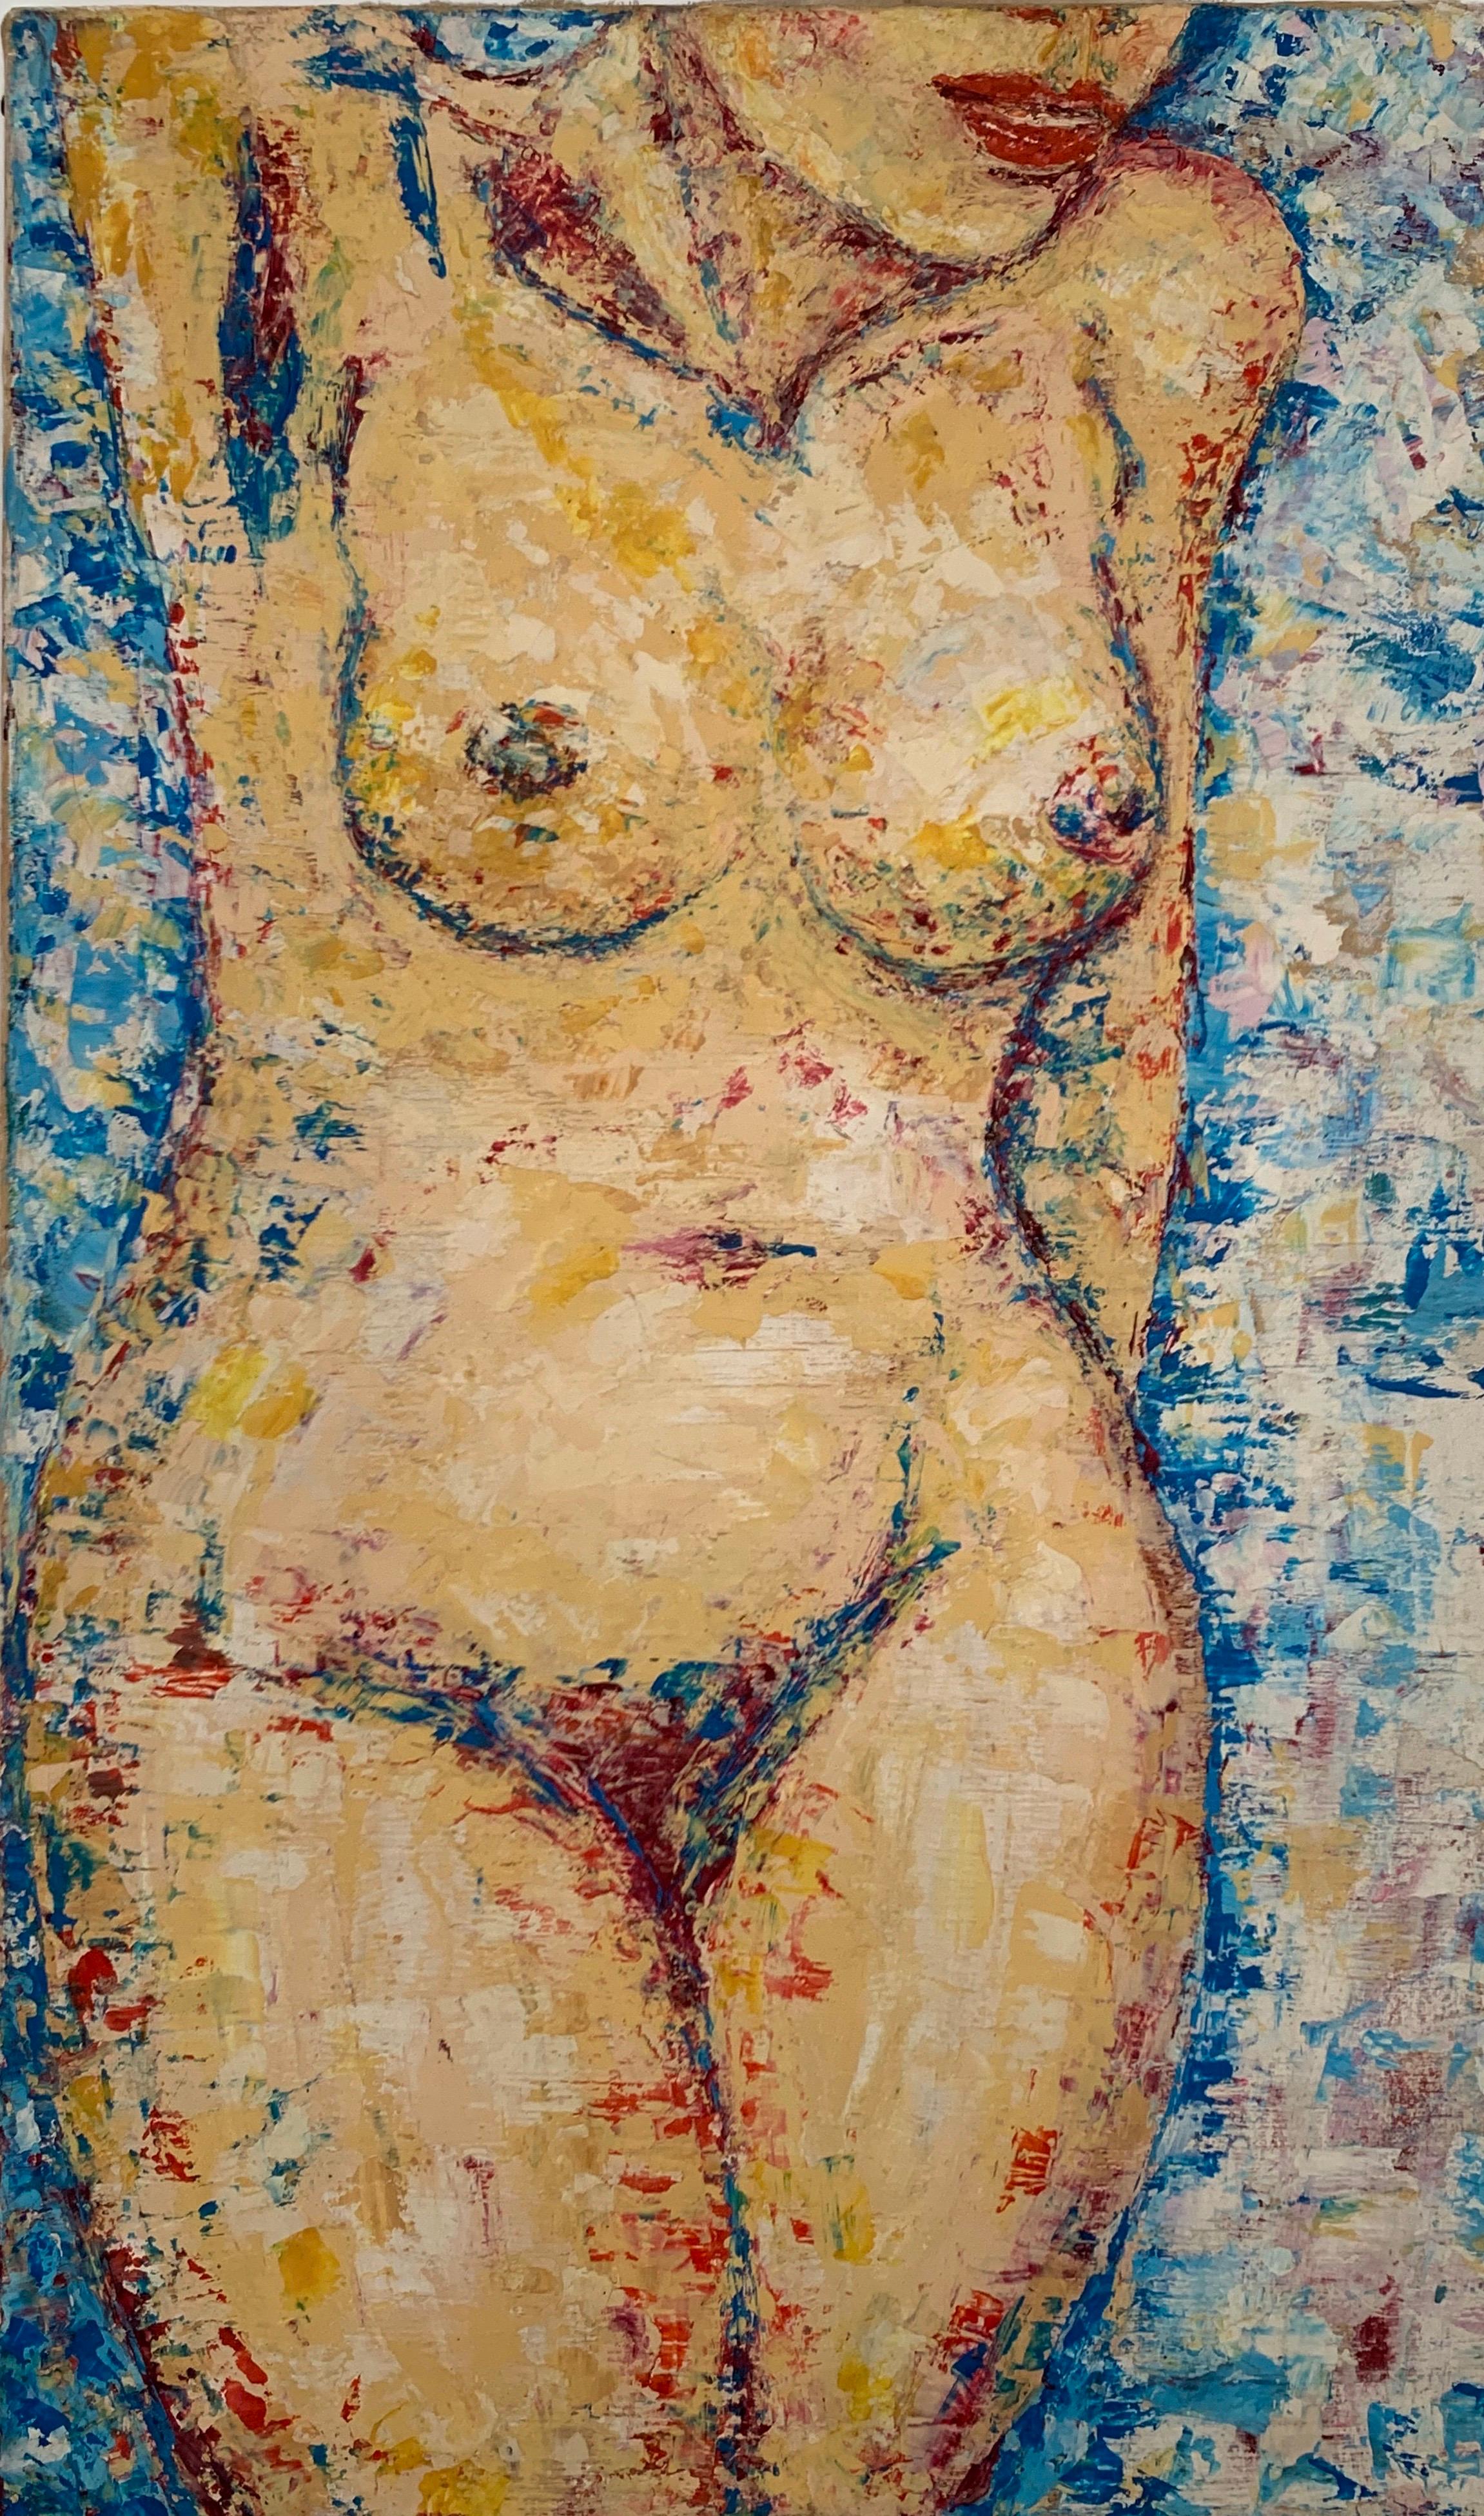 Unknown Figurative Painting – 1970er Jahre FRENCH POST-IMpressIONIST OIL - NUDE LADY SUNBATHING BLUE BACKGROUND